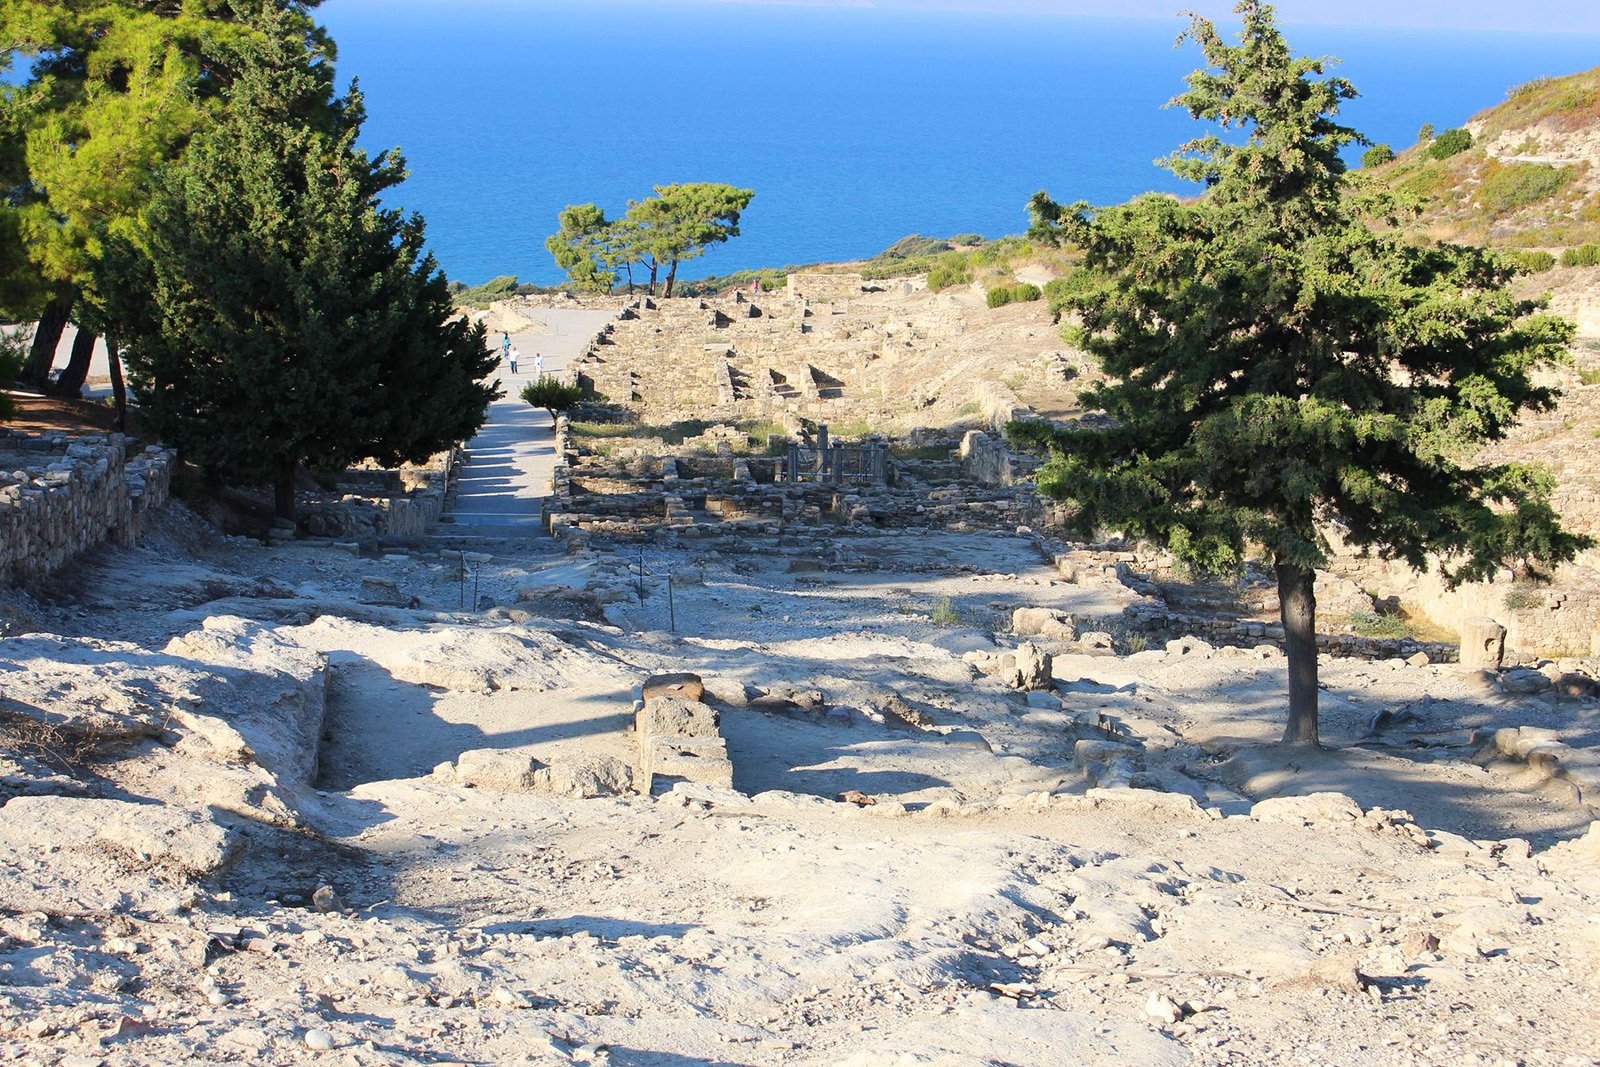 How to see the panorama of the ancient Kamiros town on Rhodes